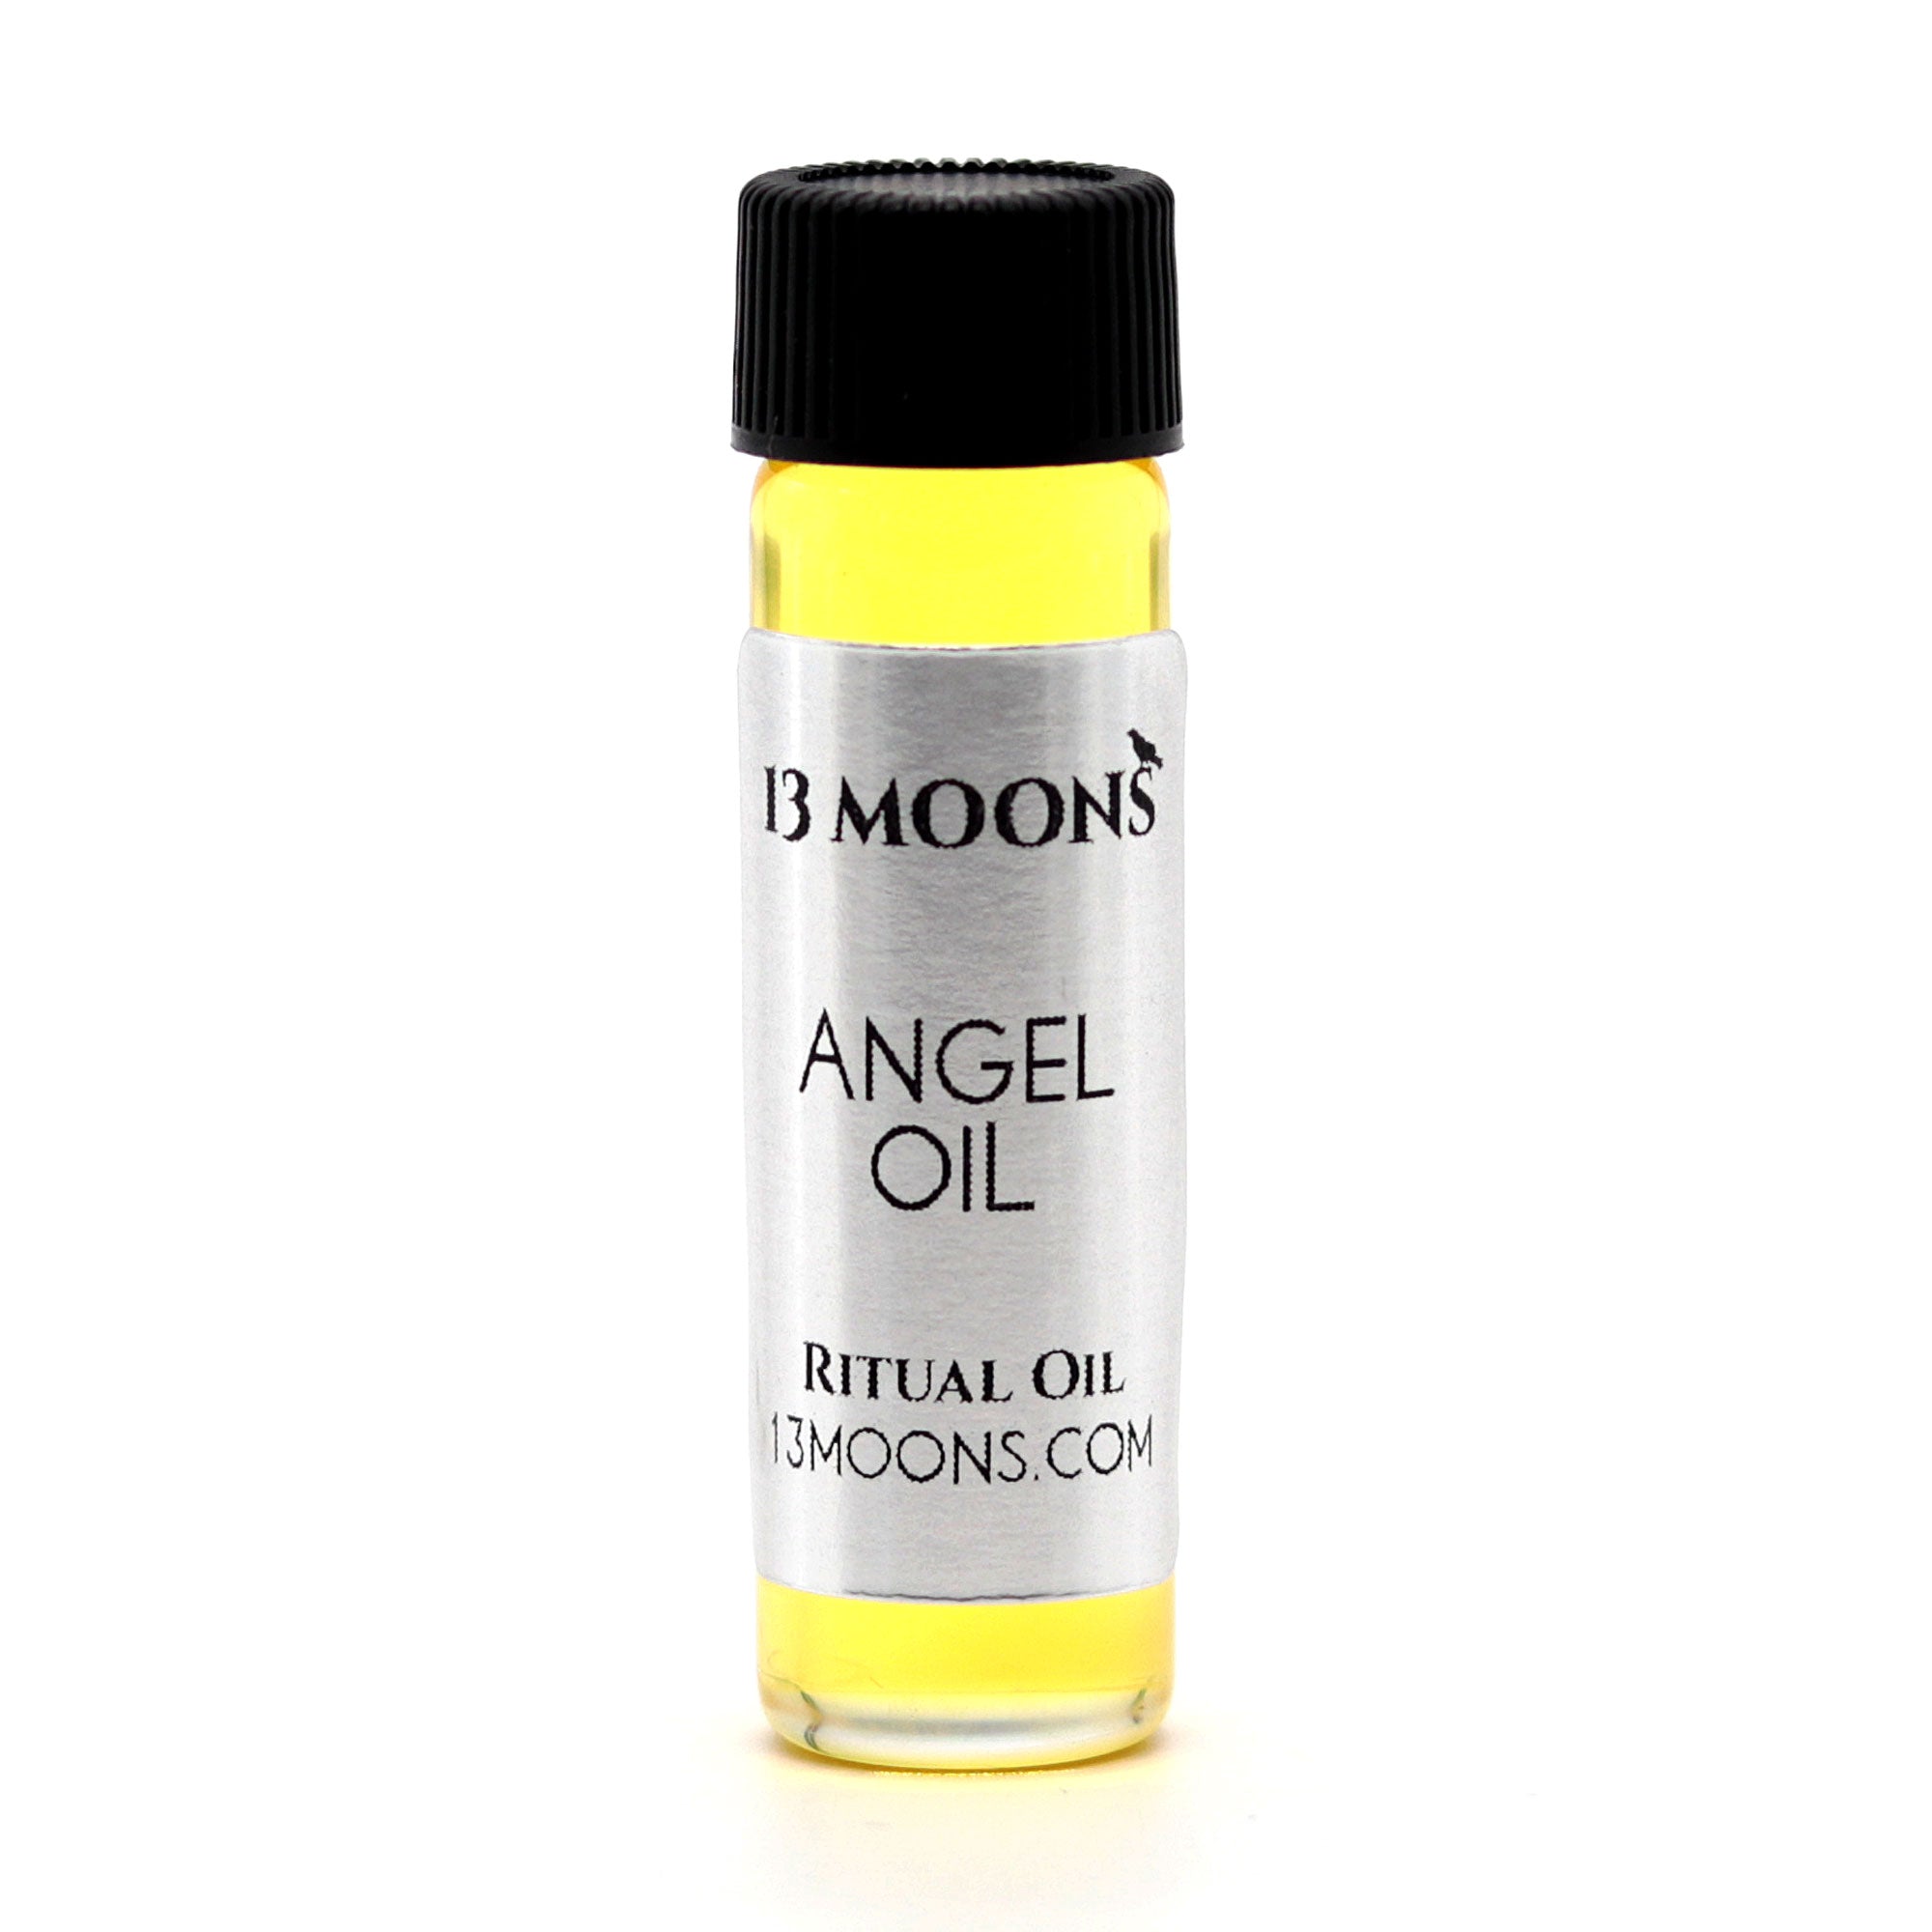 Angel Oil by 13 Moons - 13 Moons